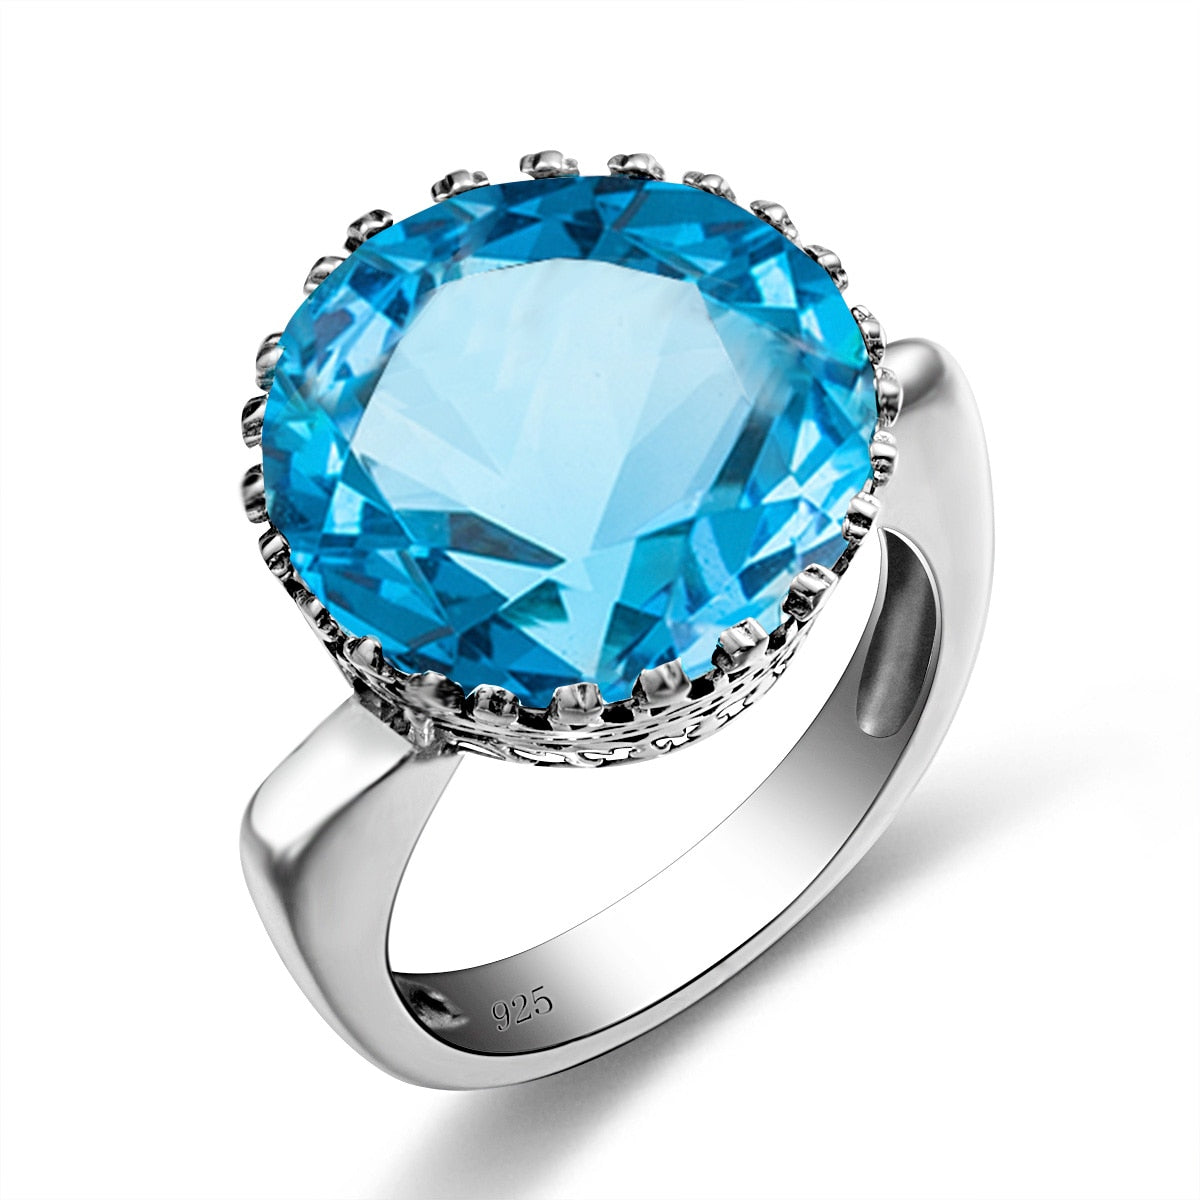 Szjinao Vintage 100% 925 Sterling Silver 15ct Round Created Aquamarine Ring For Women Famous Branded Handmade Fine Jewelery 2021 Blue Topaz